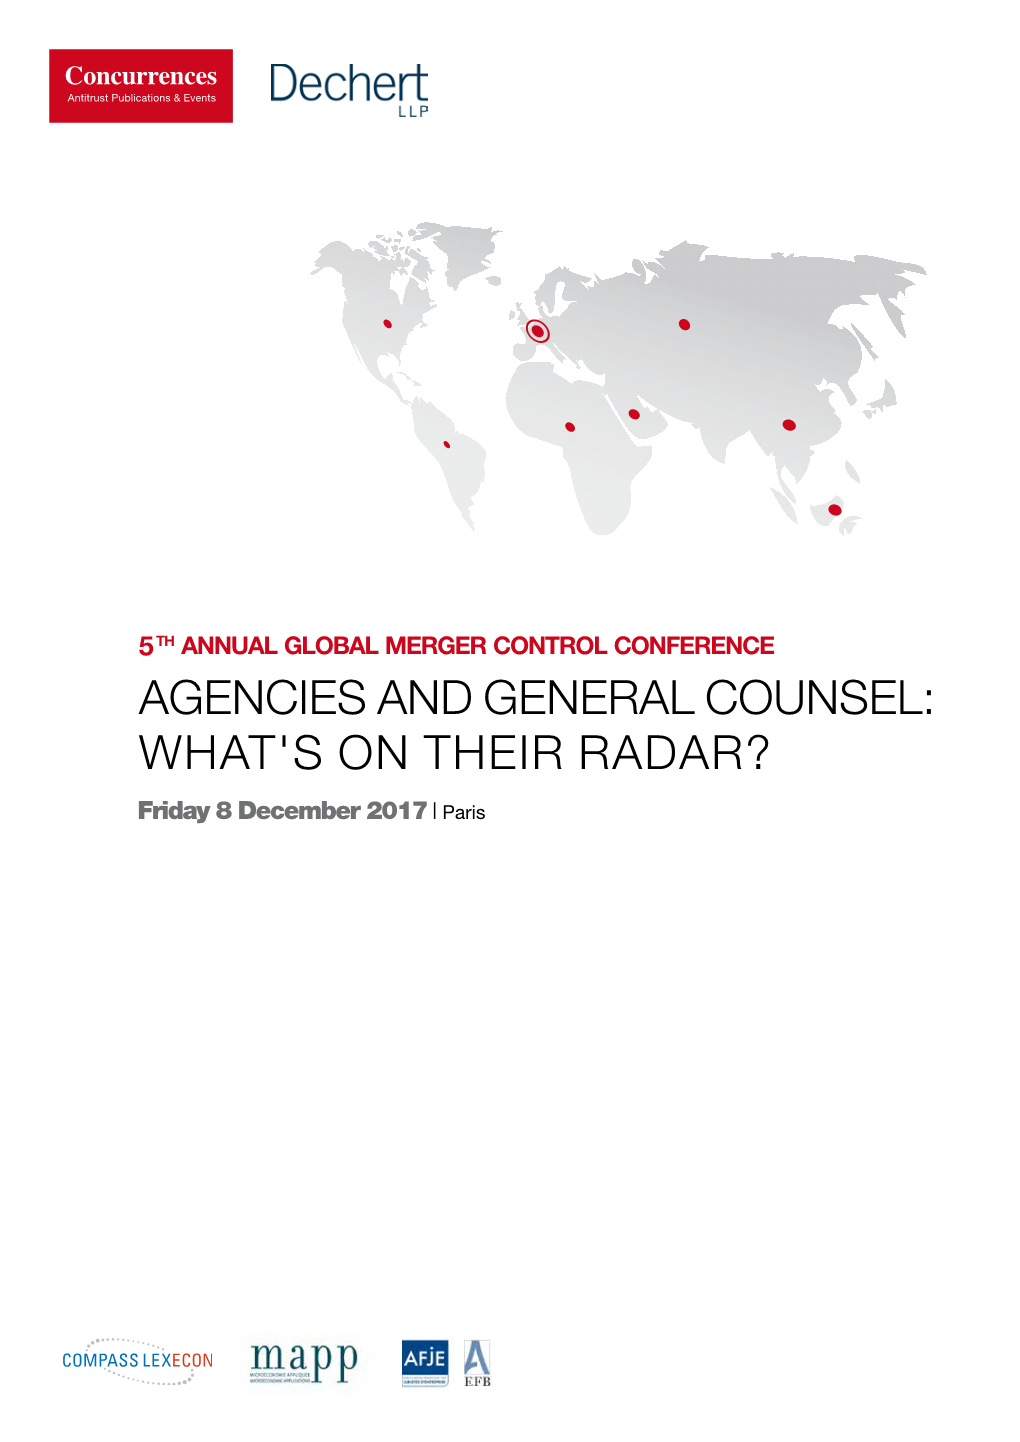 Agencies and General Counsel: What's on Their Radar?